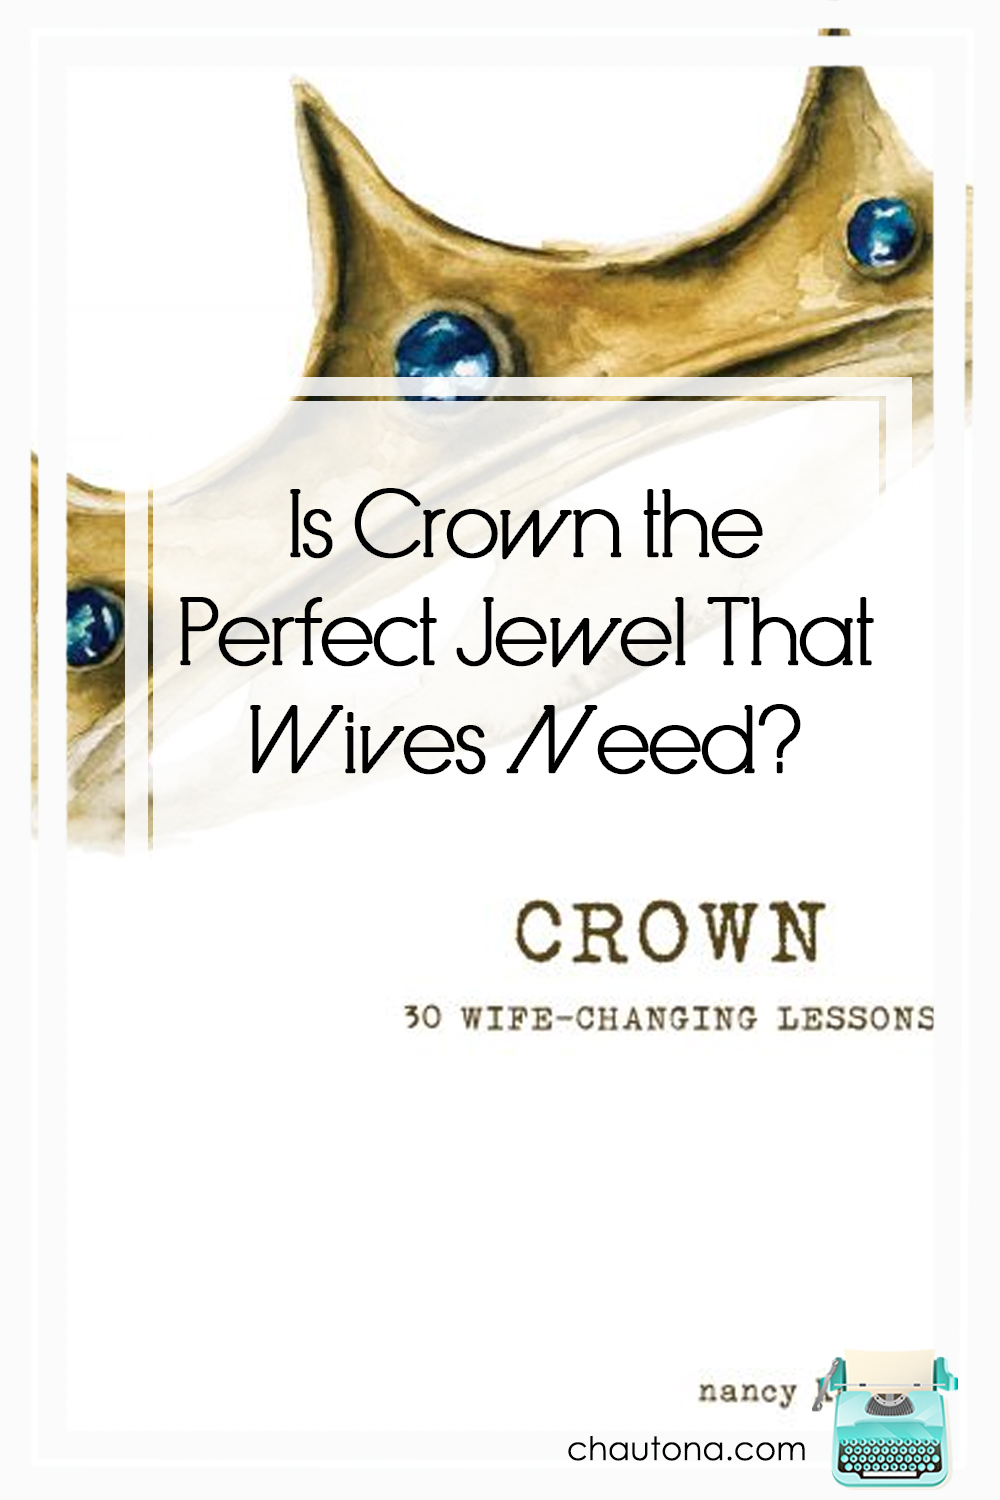 Is Crown the Perfect Jewel That Wives Need?